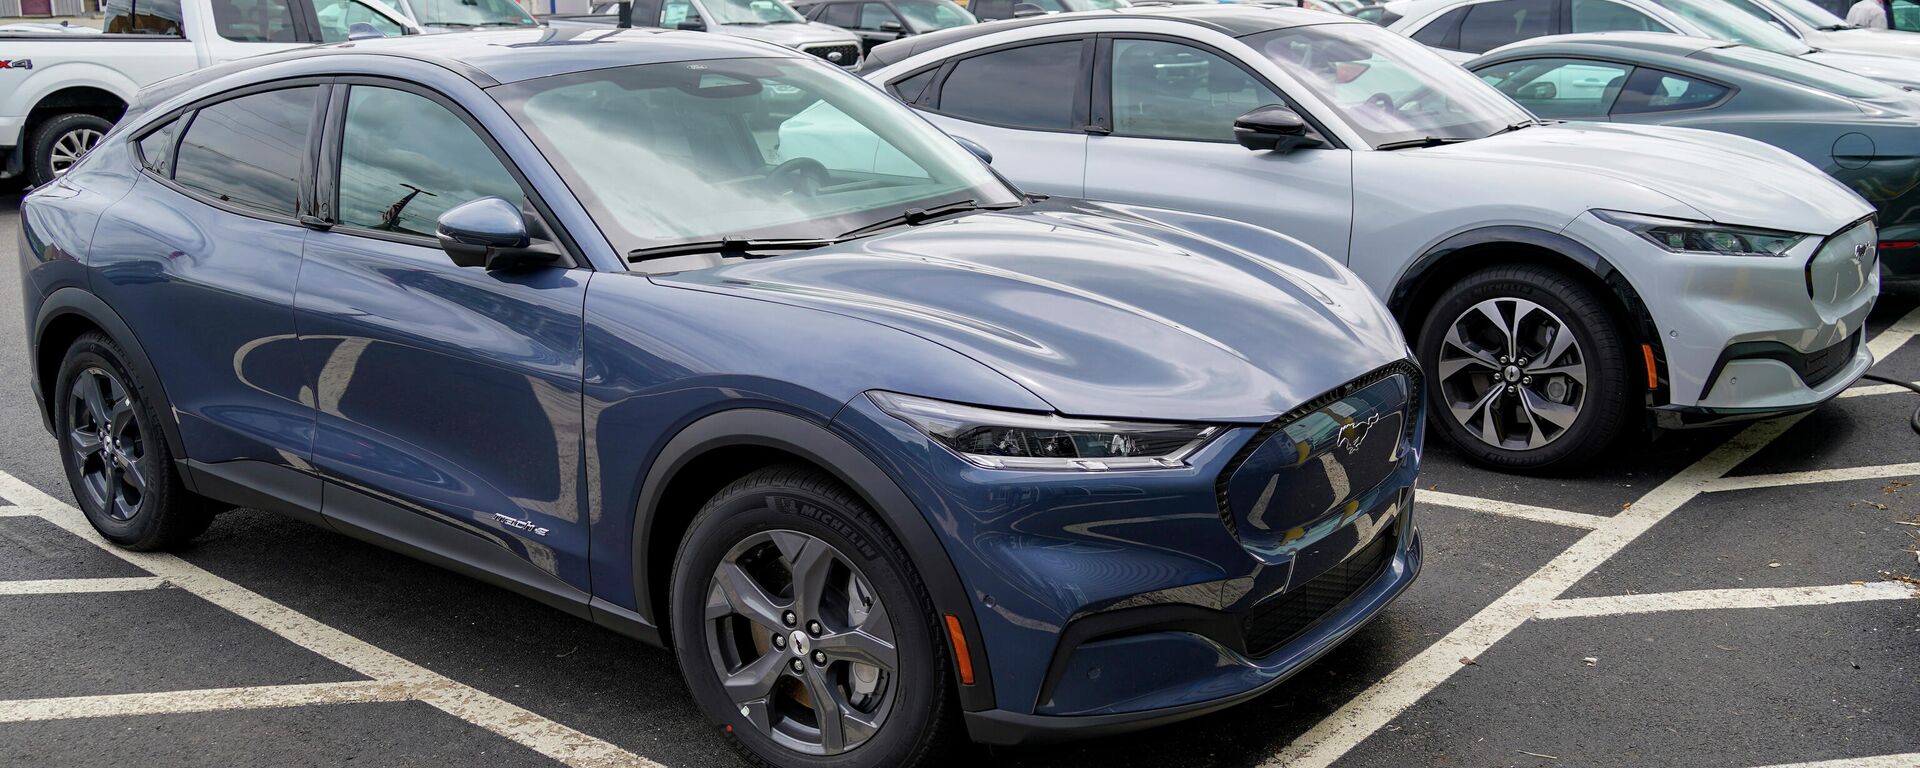 A pair of 2021 Ford Mustang Mach E are displayed for sale at a Ford dealer on Thursday, May 6, 2021, in Wexford, Pa. - Sputnik International, 1920, 05.01.2022